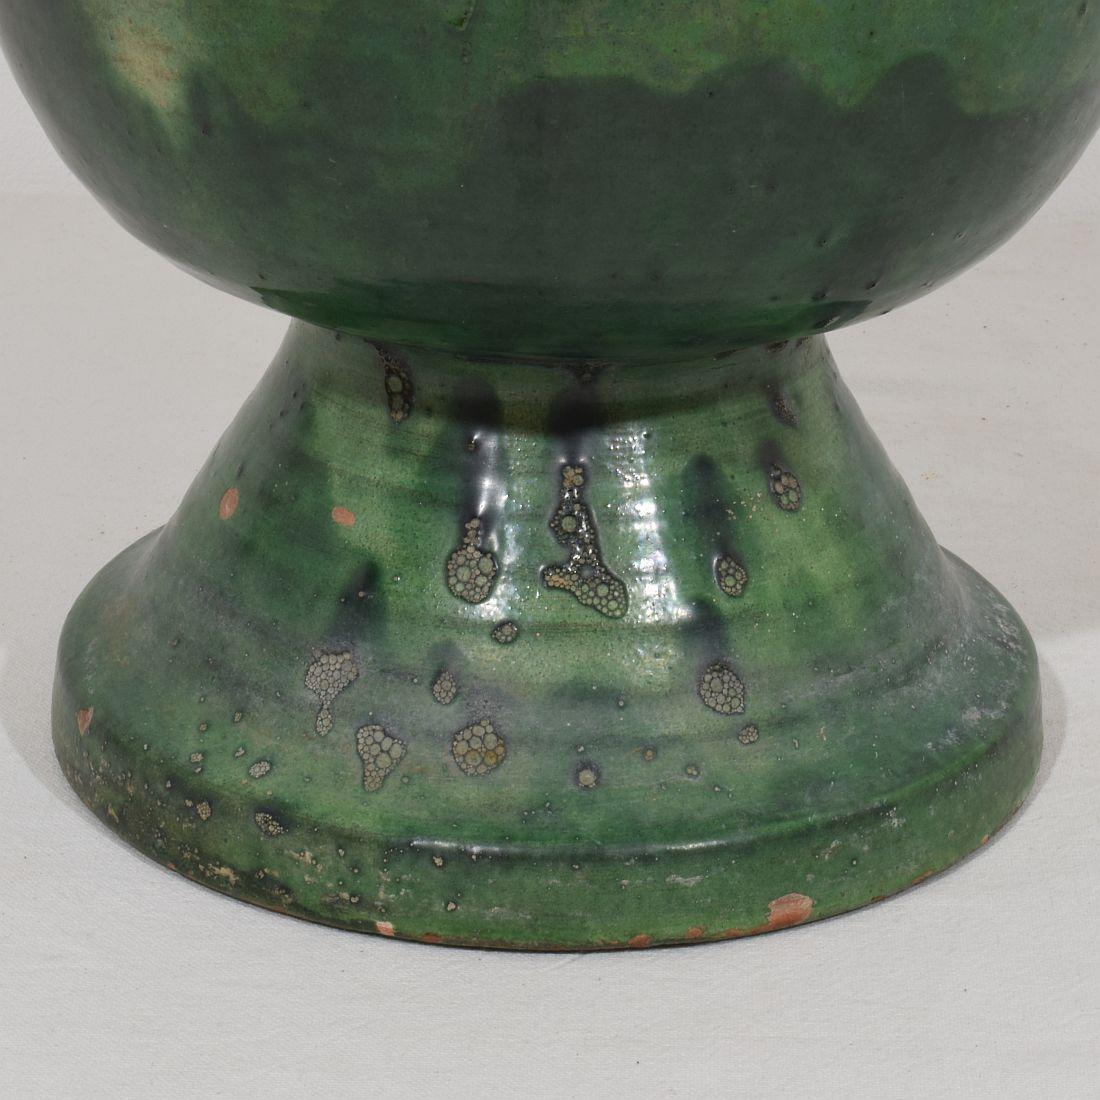 French 19th Century Green Glazed Earthenware Castelnaudary Planter / Vase For Sale 7